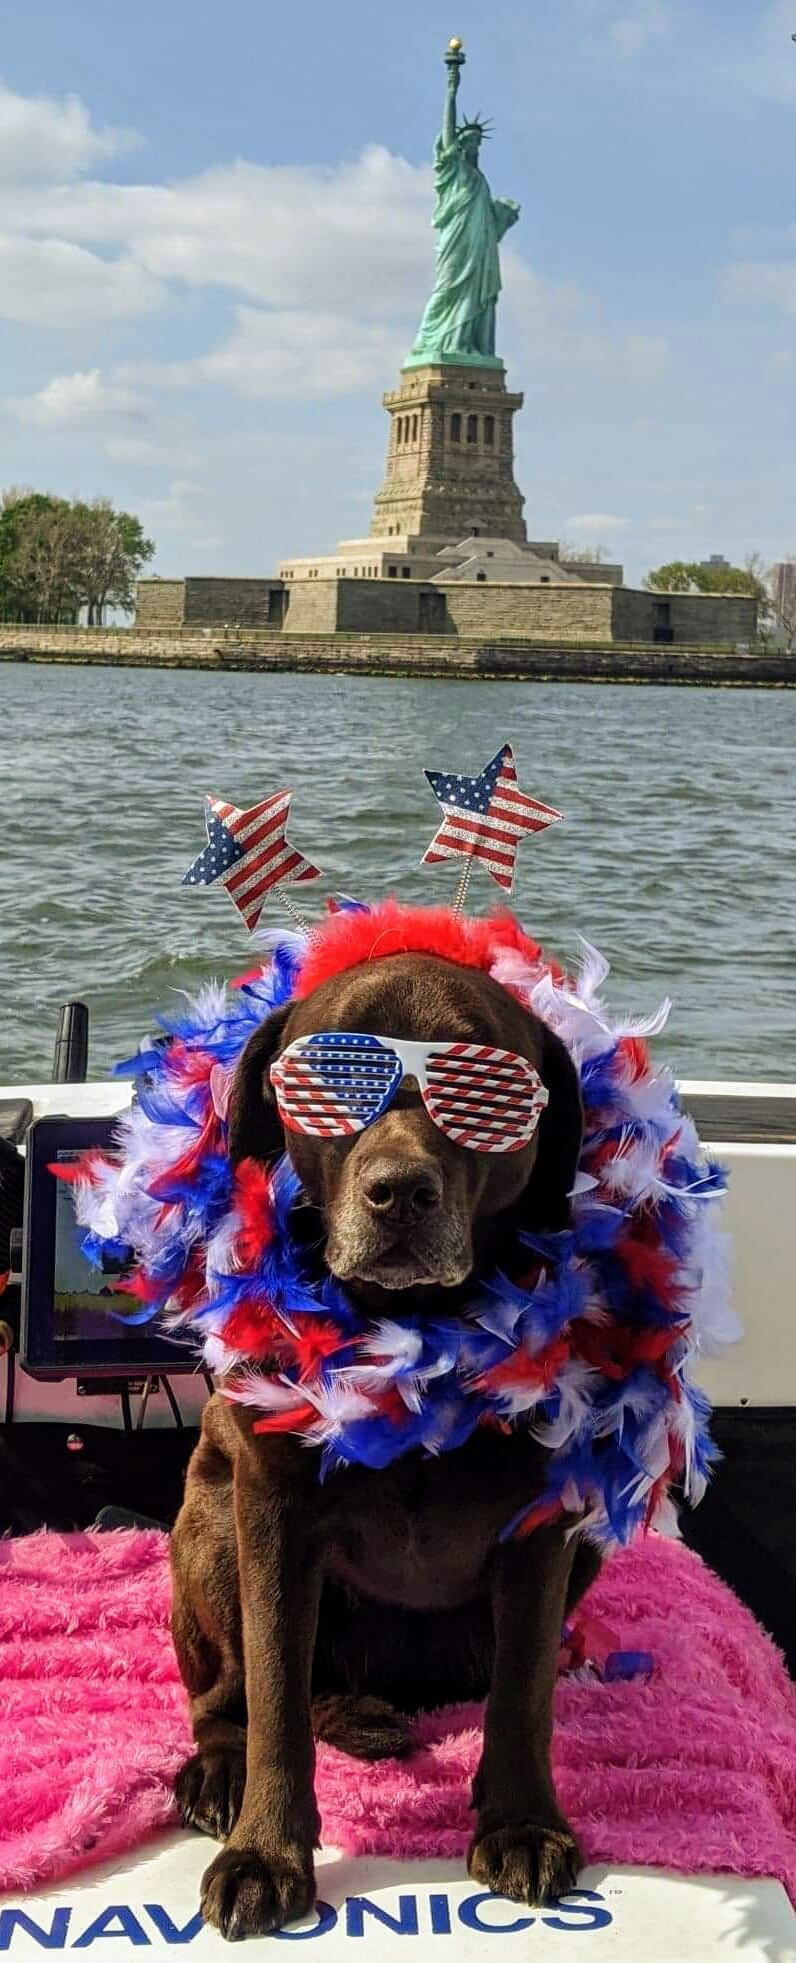 dog sitting on boat next to statue of liberty